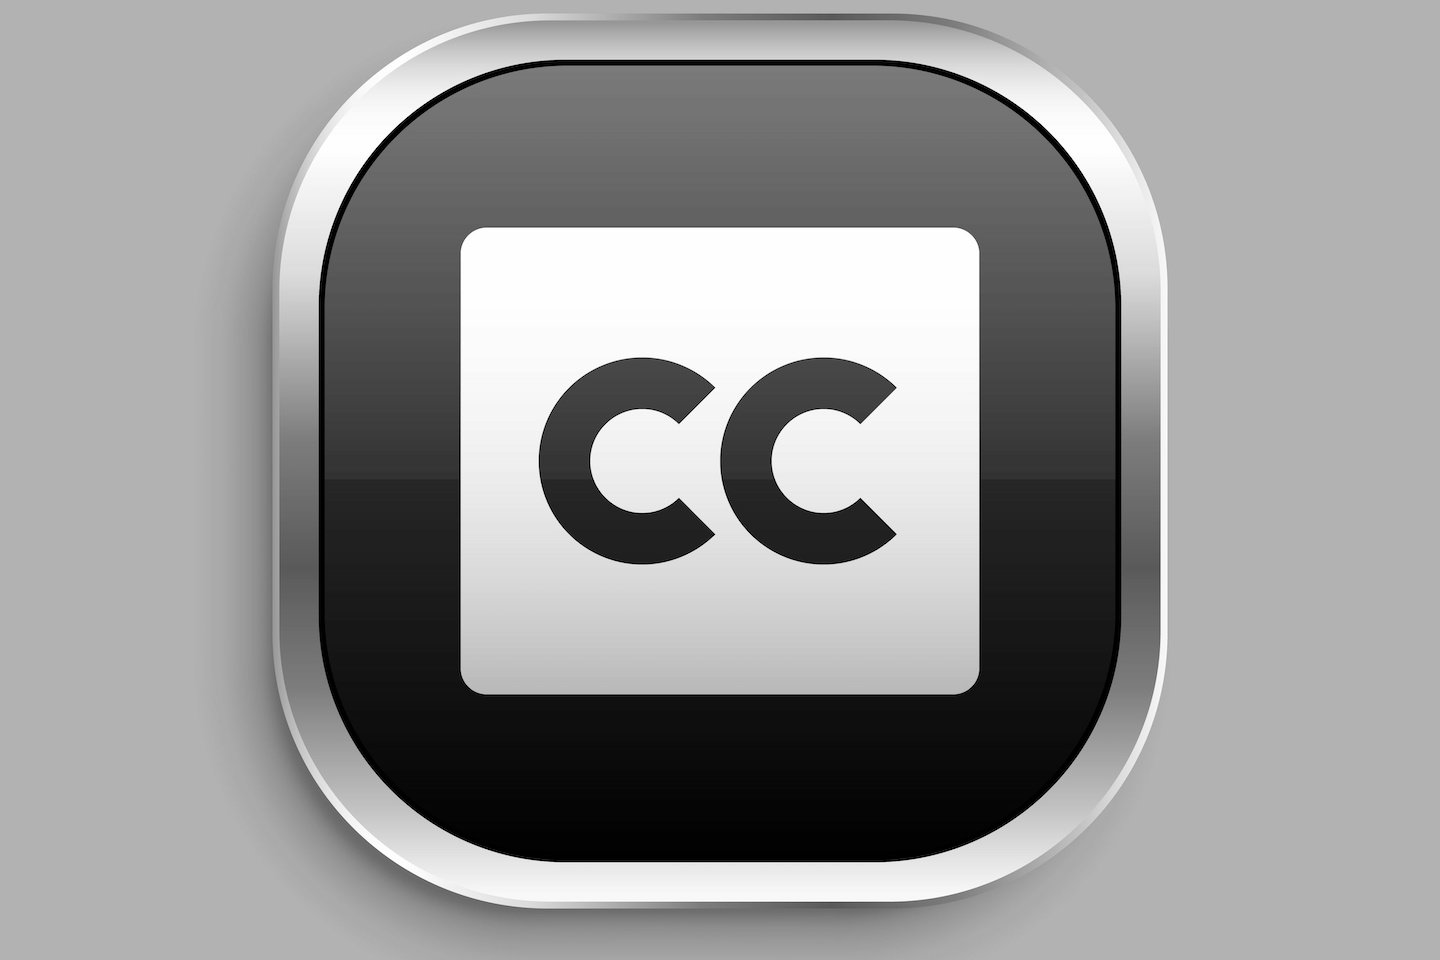 closed captioning fill icon design. Glossy Button style rounded rectangle isolated on gray background. Vector illustration